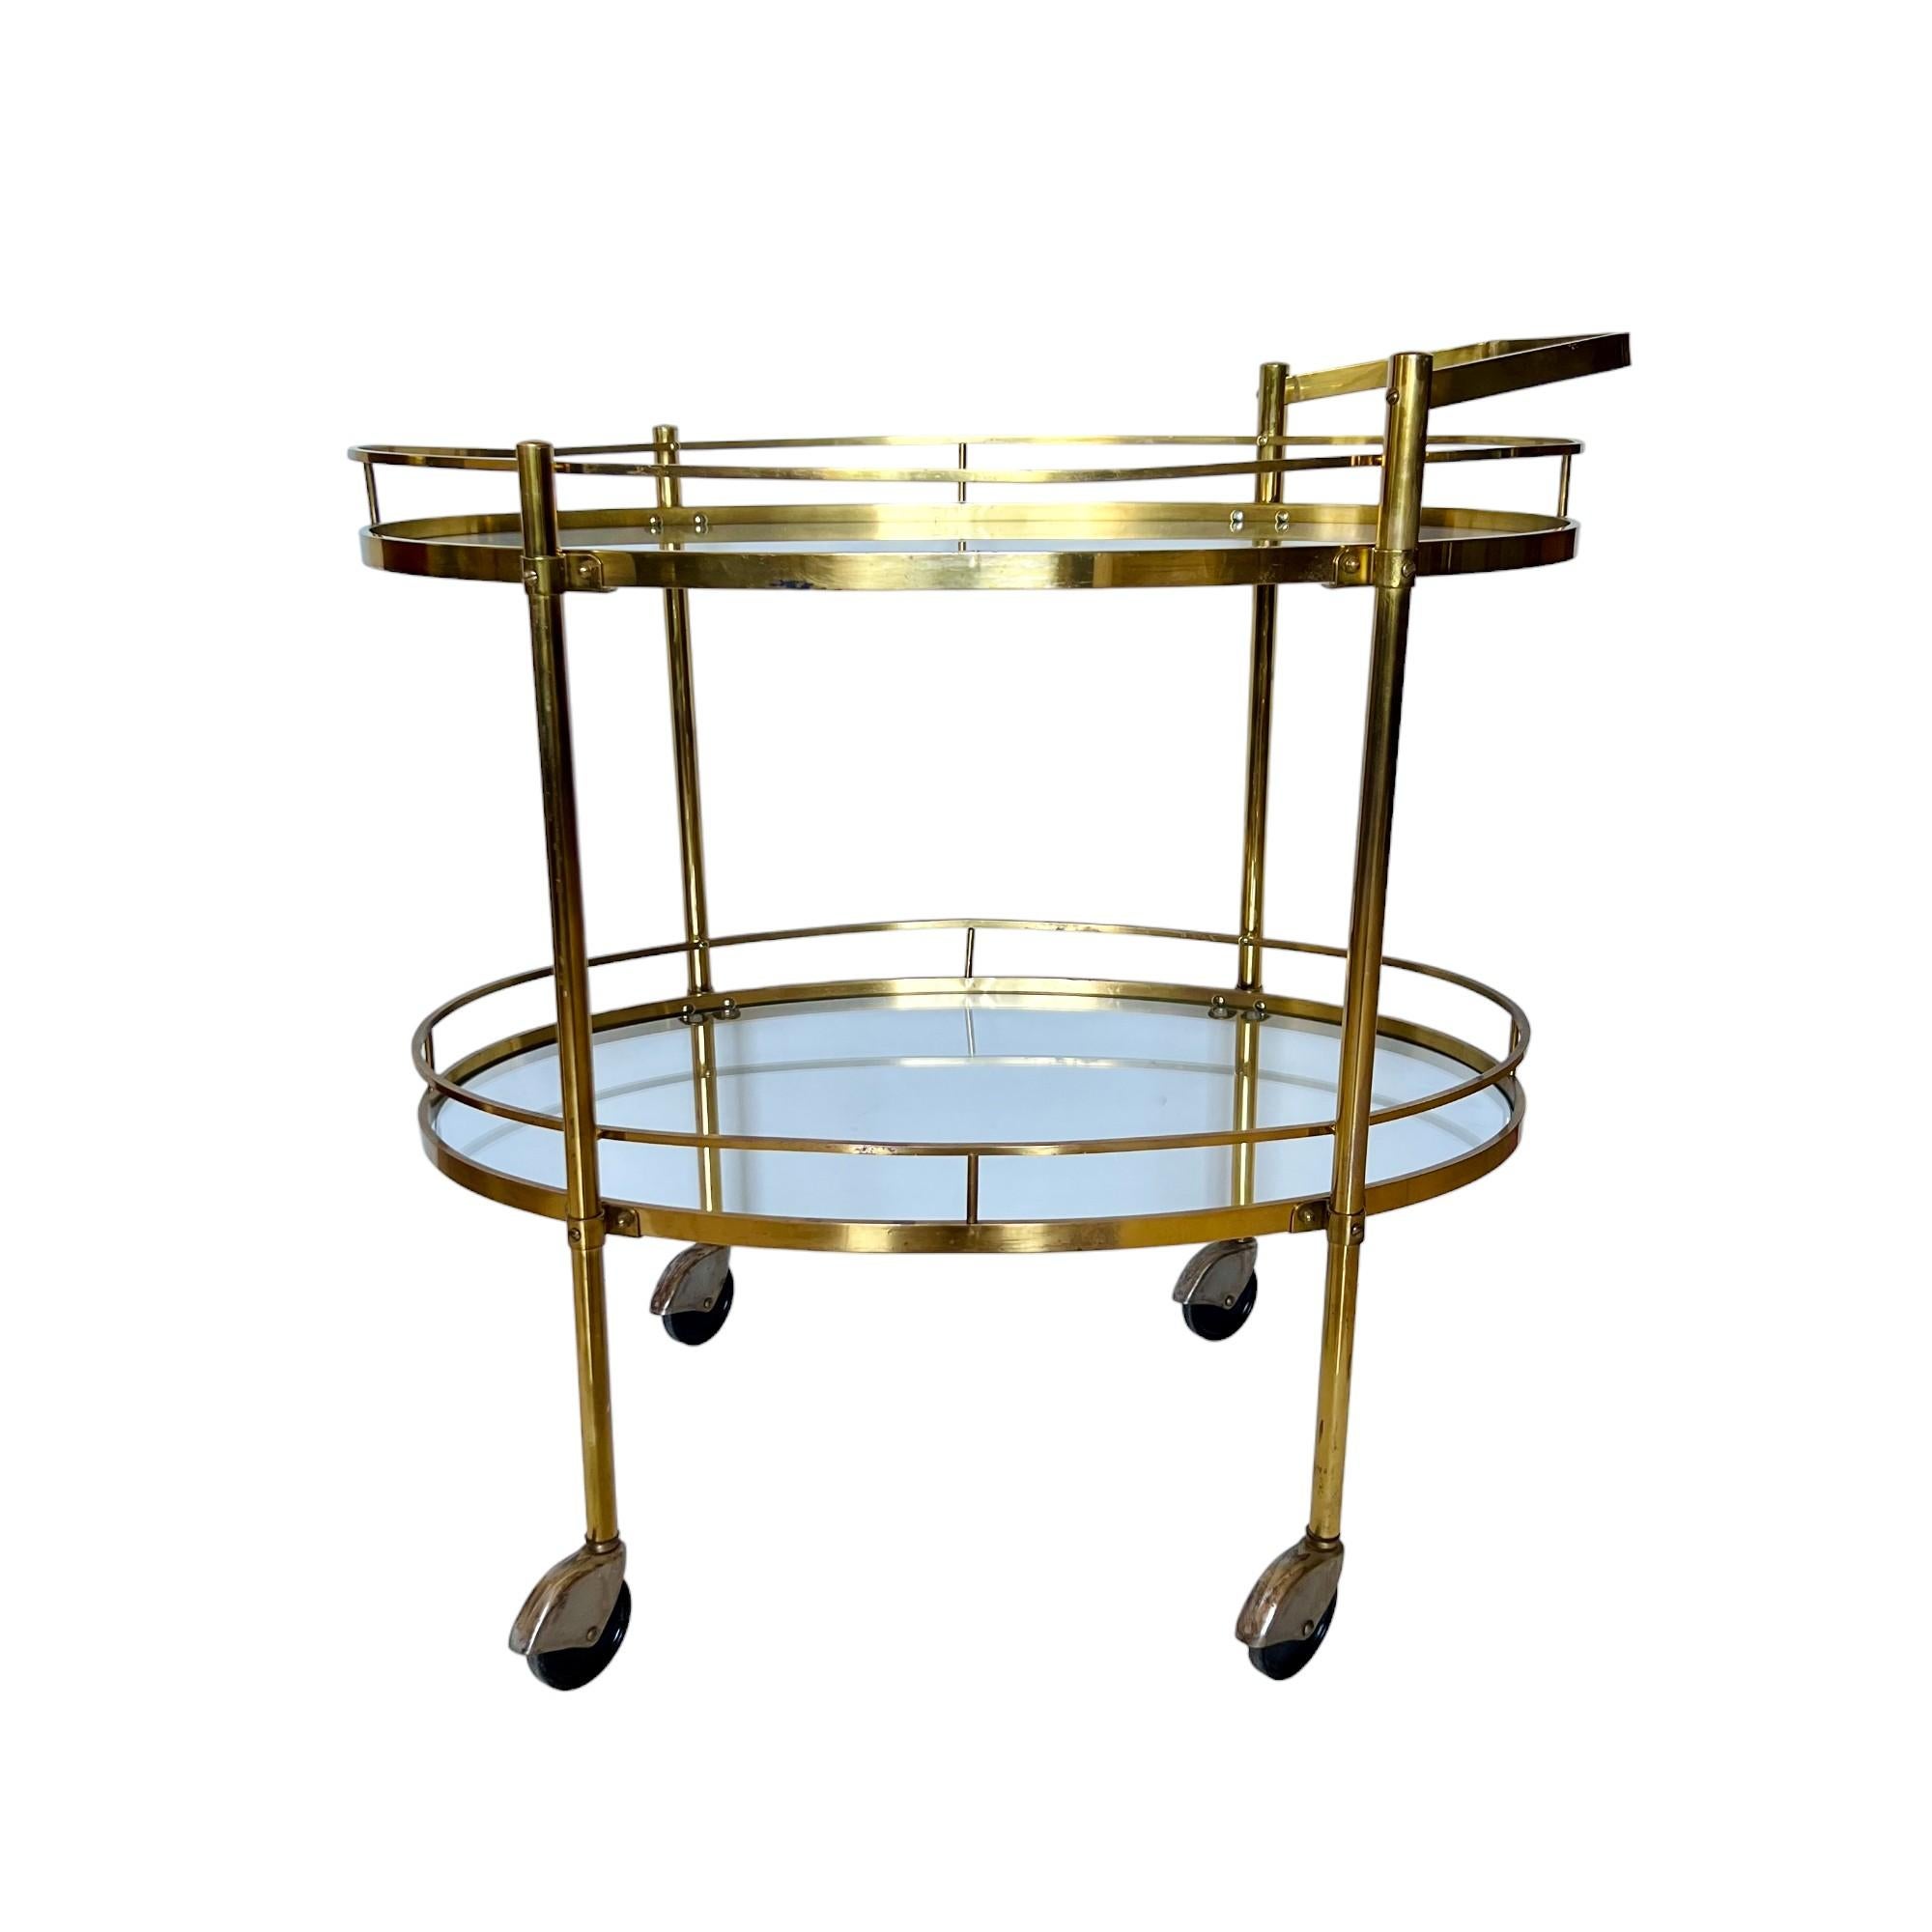 A vintage 1960's Hollywood Regency style two tier brass and glass oval bar or tea cart. It features a solid brass frame with an angular handle, floating form transparent glass shelves and black rolling casters with steel wheel covers. 

Dimensions: